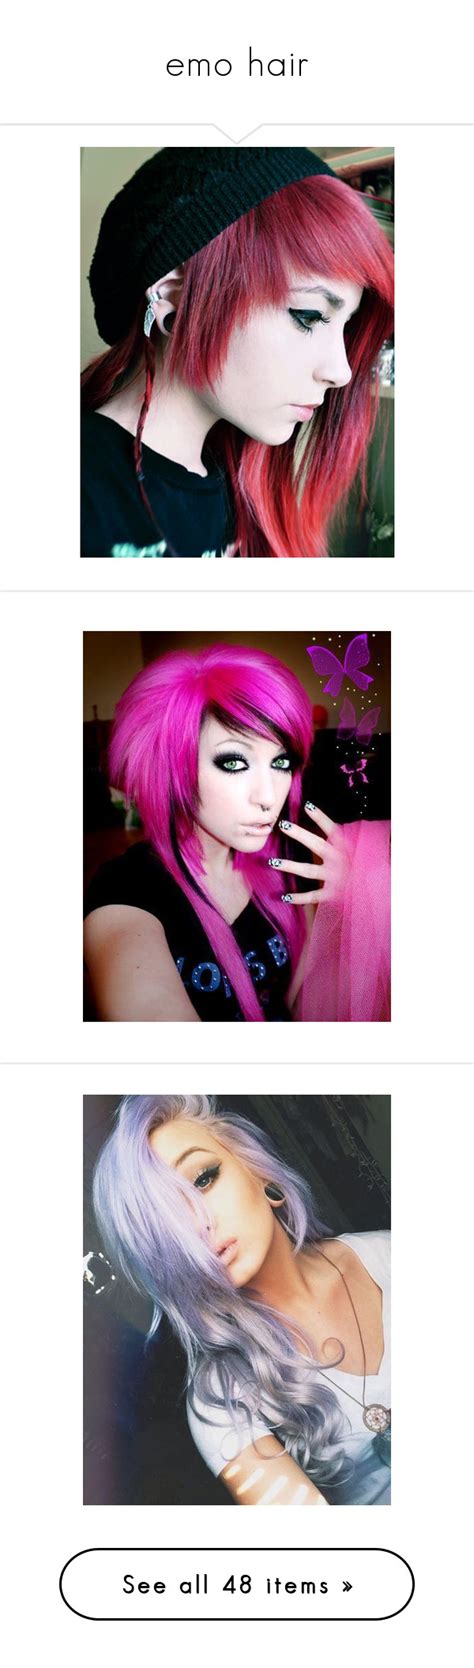 emo hair by bluekiller2002 liked on polyvore featuring hair people